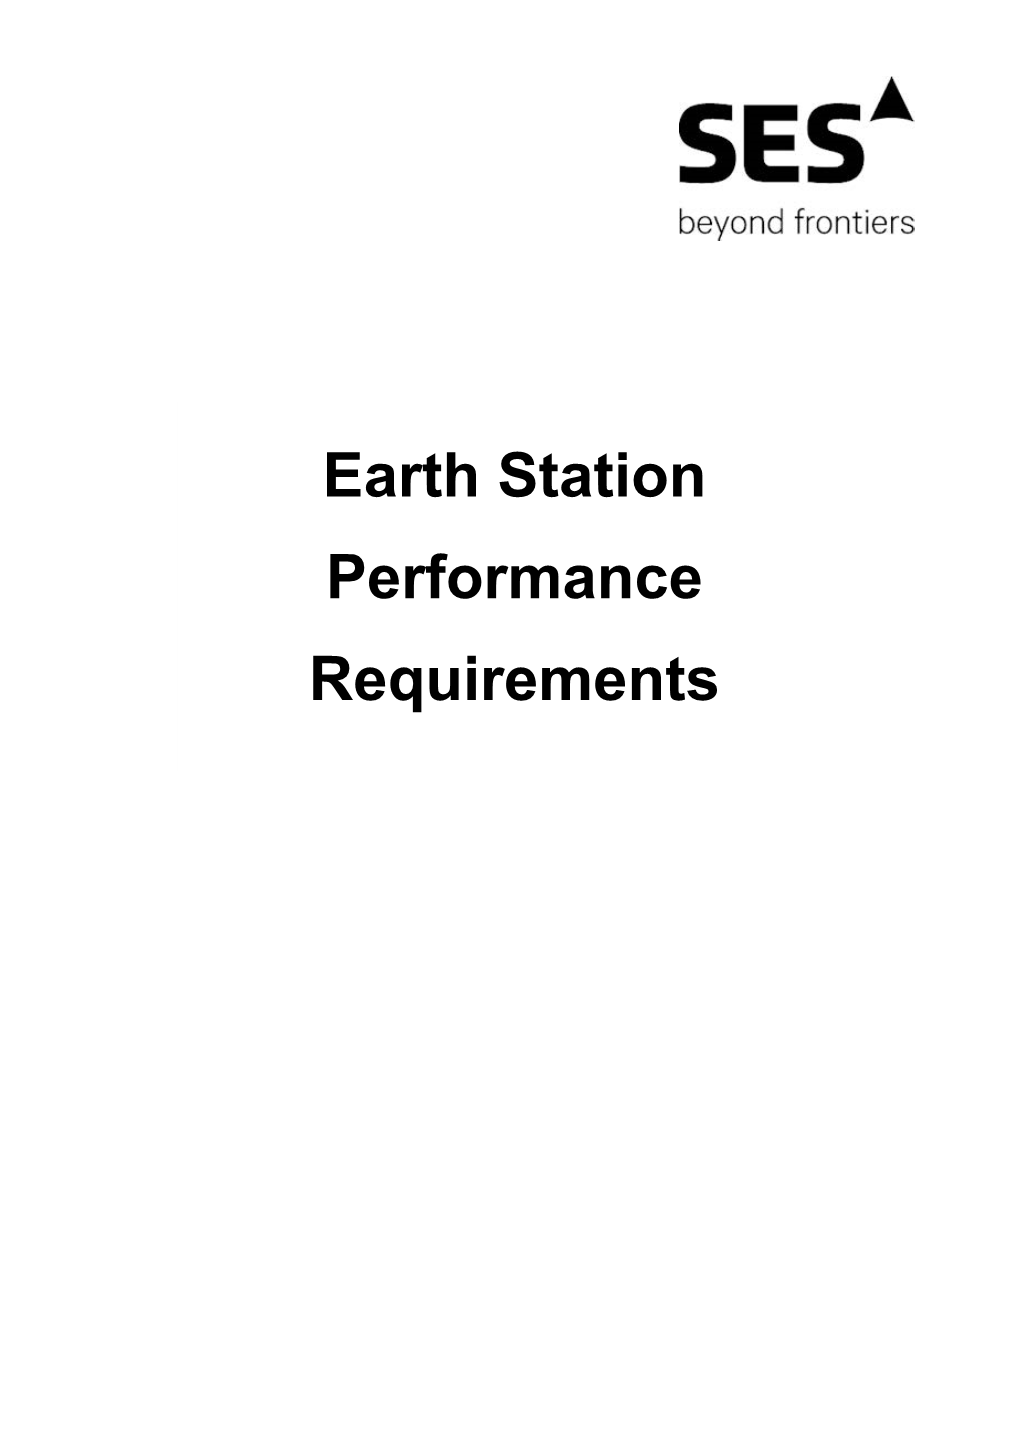 Earth Station Performance Requirements